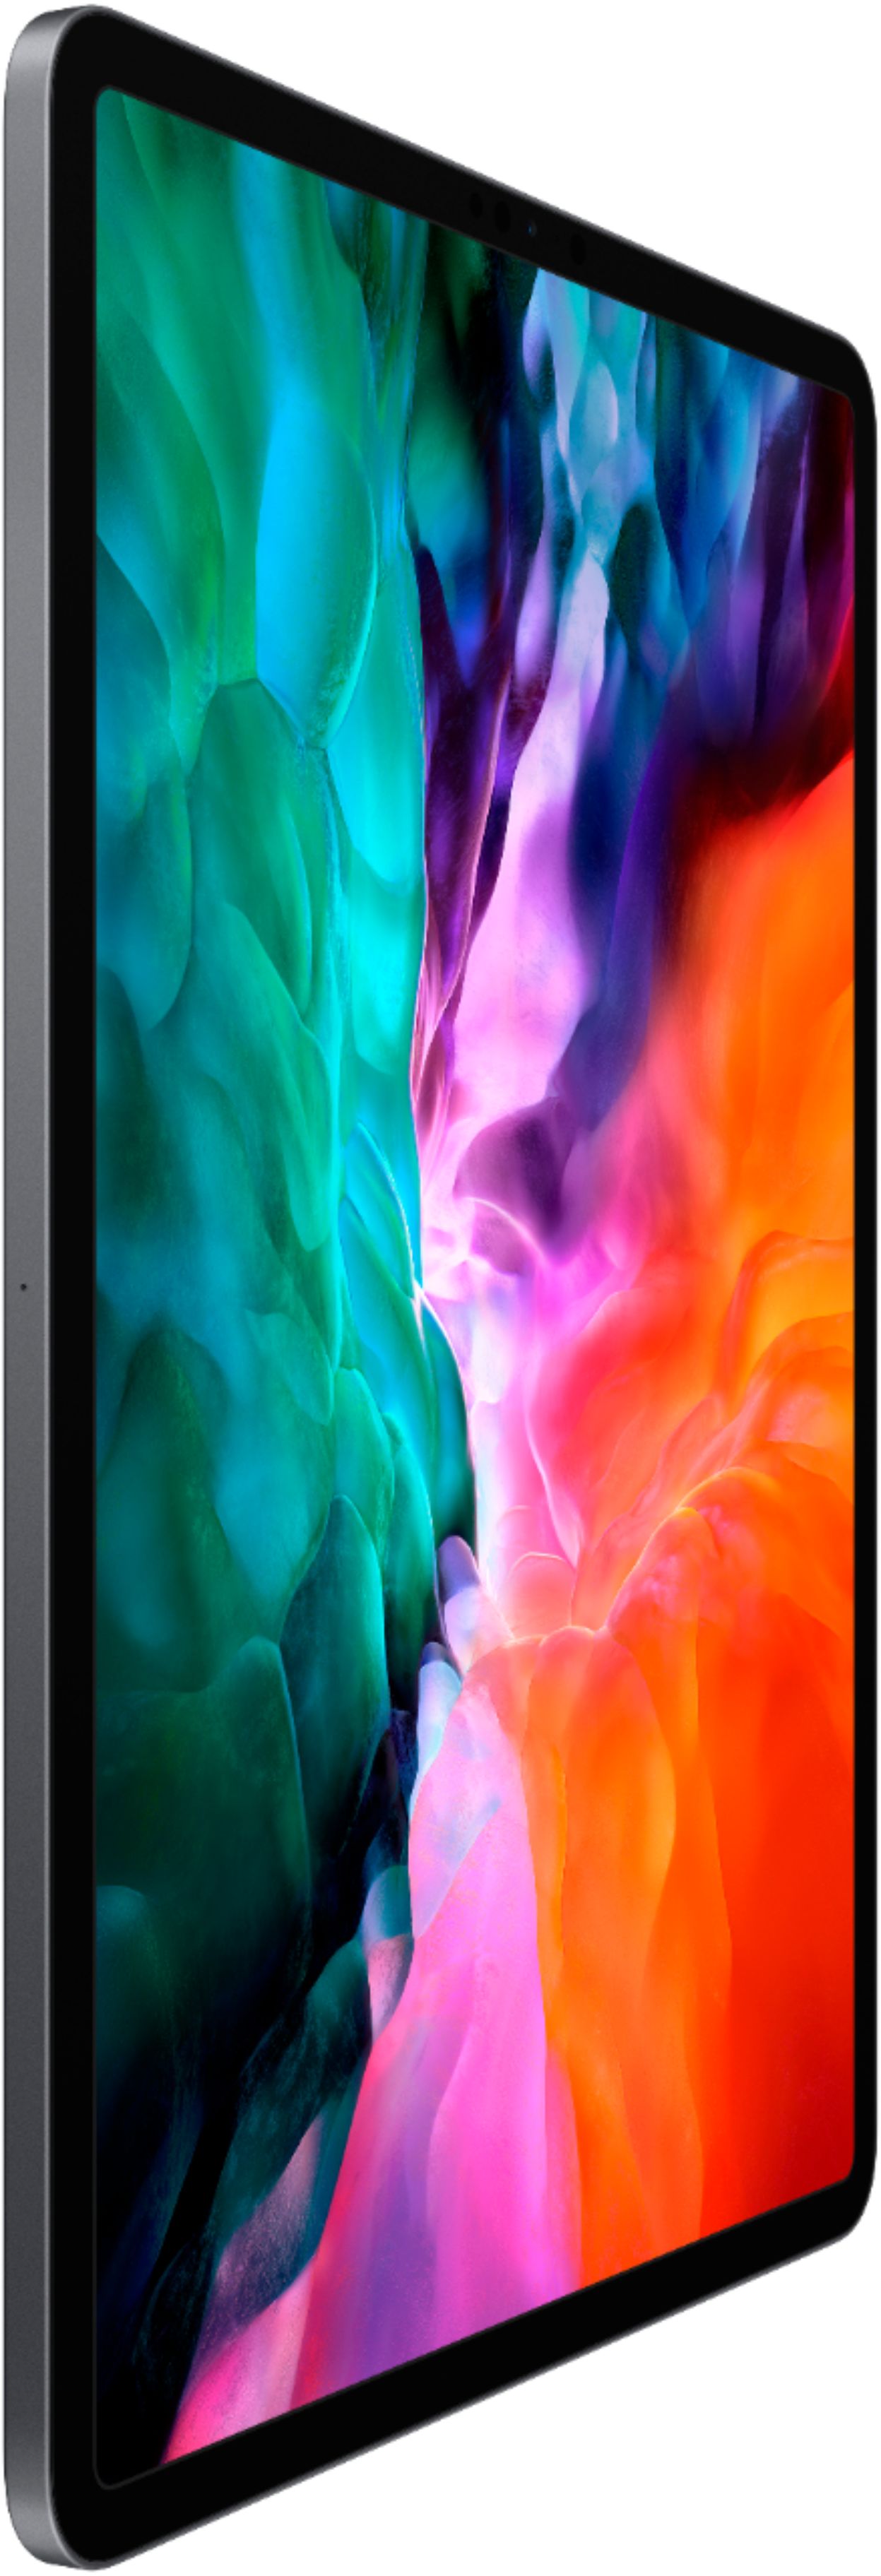 Best Buy: Apple 12.9-Inch iPad Pro (4th Generation) with Wi-Fi + 